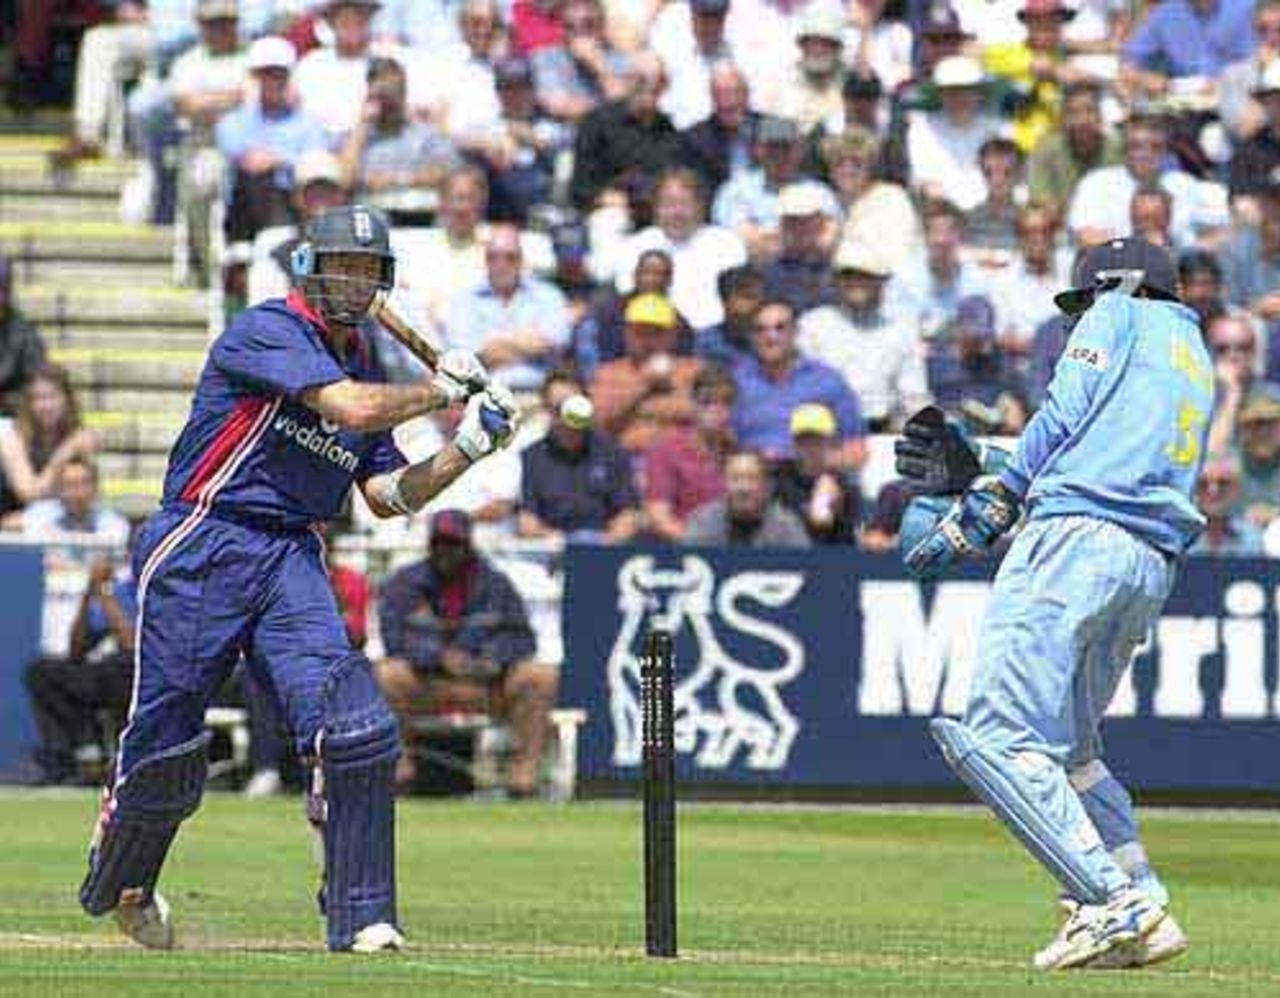 Nasser Hussain shovels a delivery round the corner as keeper Dravid takes avoiding action, England v India, NatWest Series, Lord's, Sat 29 Jun